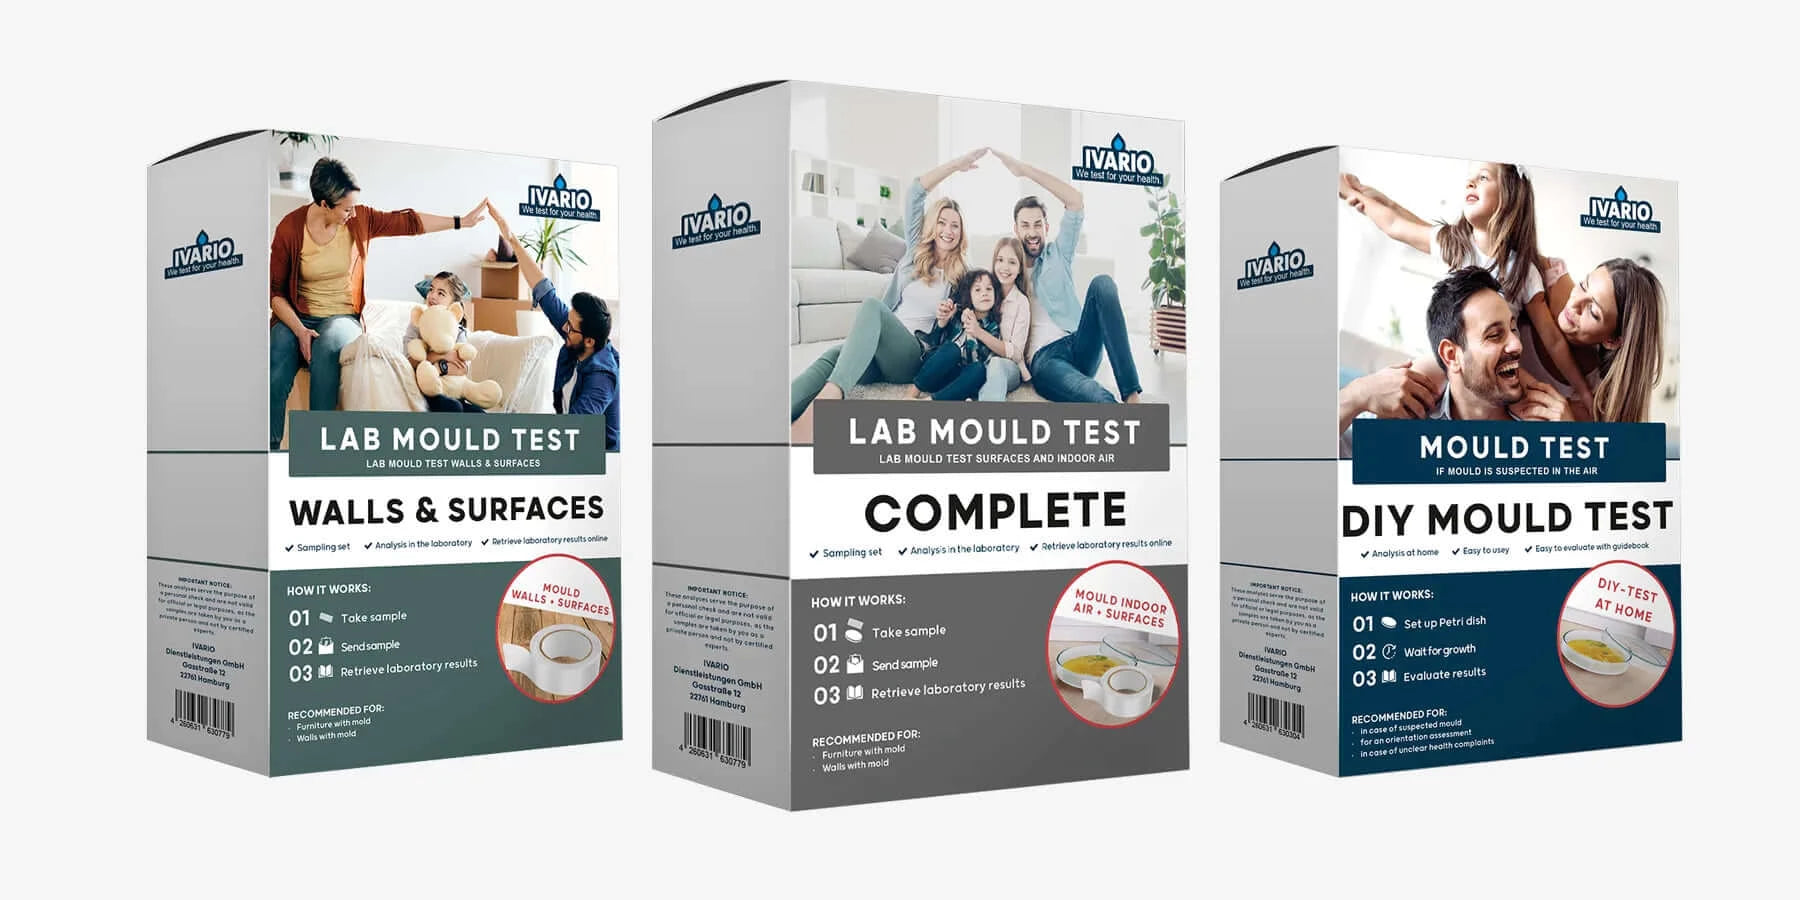 Pro Lab ~ Mold Test Kit ~ safe & easy to use ~ protect your family